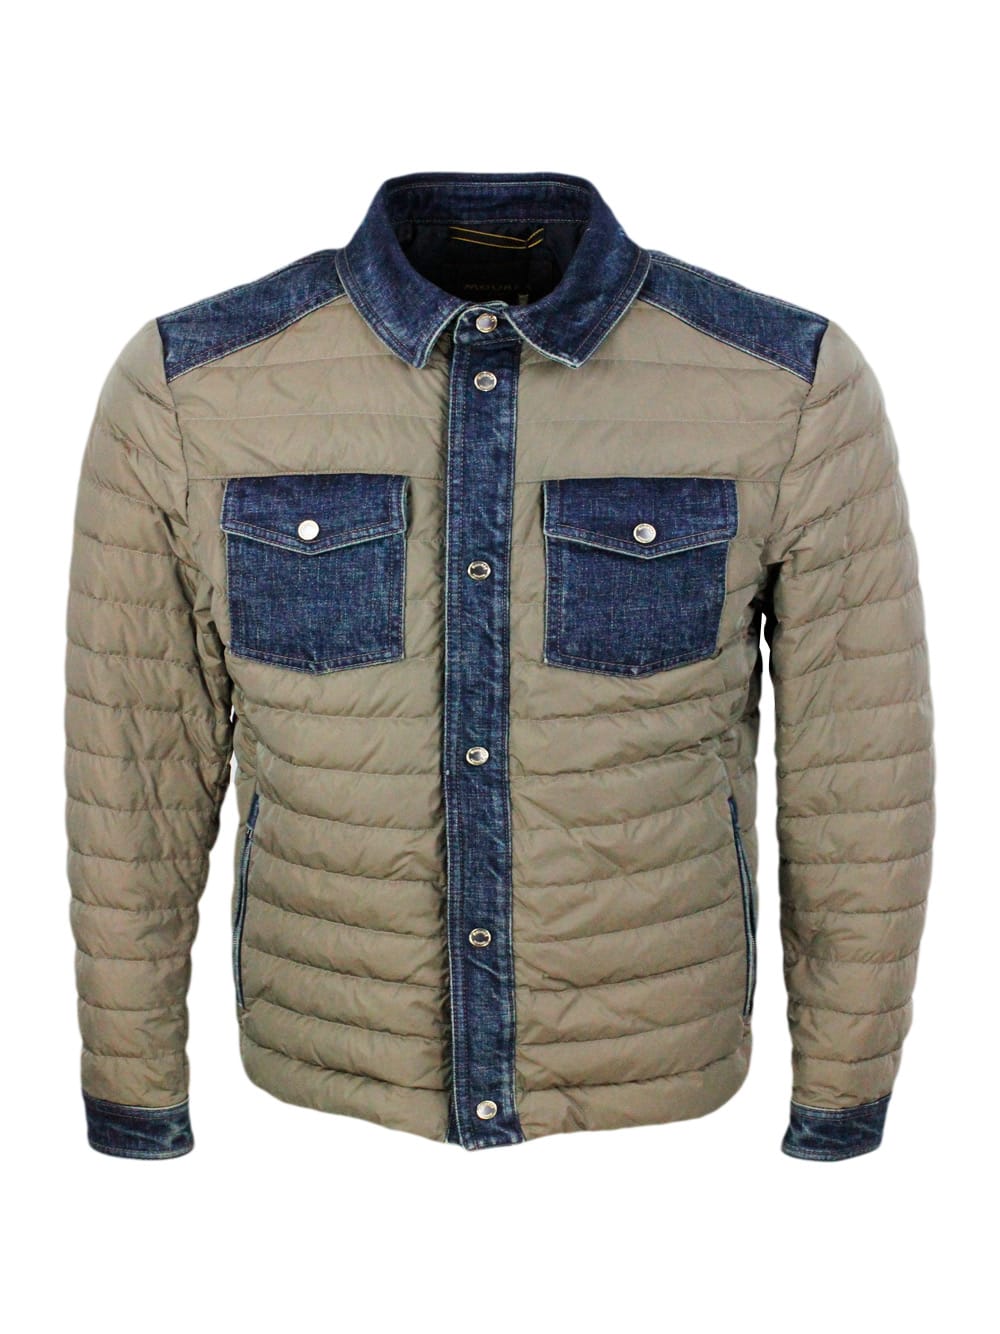 100 Gram Light Down Jacket With Denim Inserts And Details. Internal And External Side Pockets And Button Closure